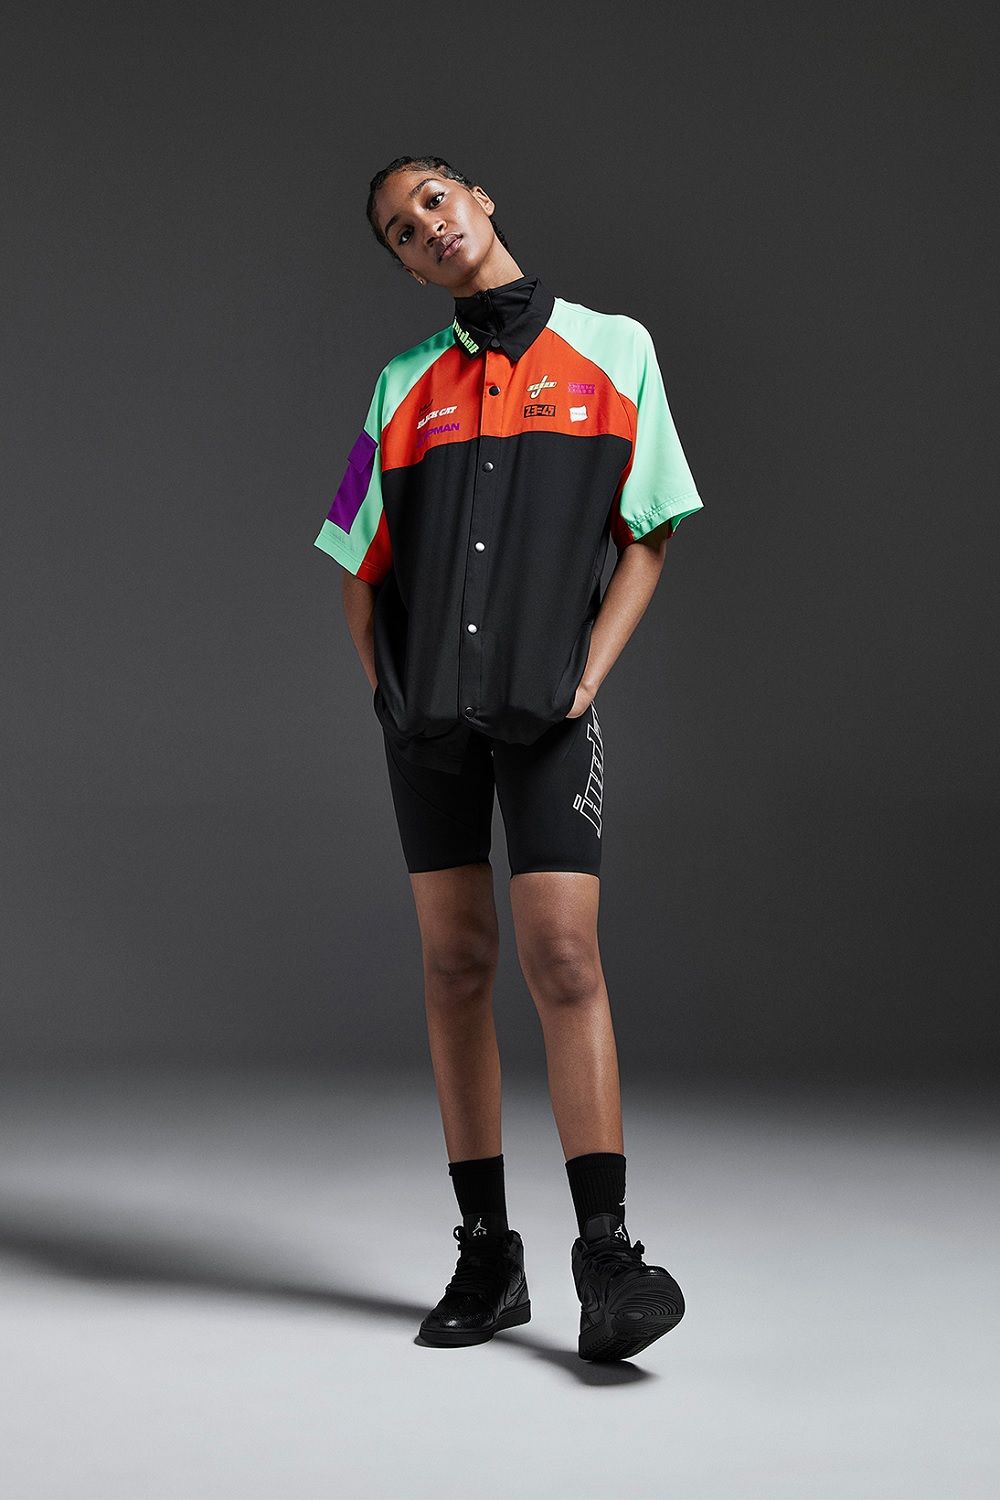 Jordan Brand presents a new apparel collection for women